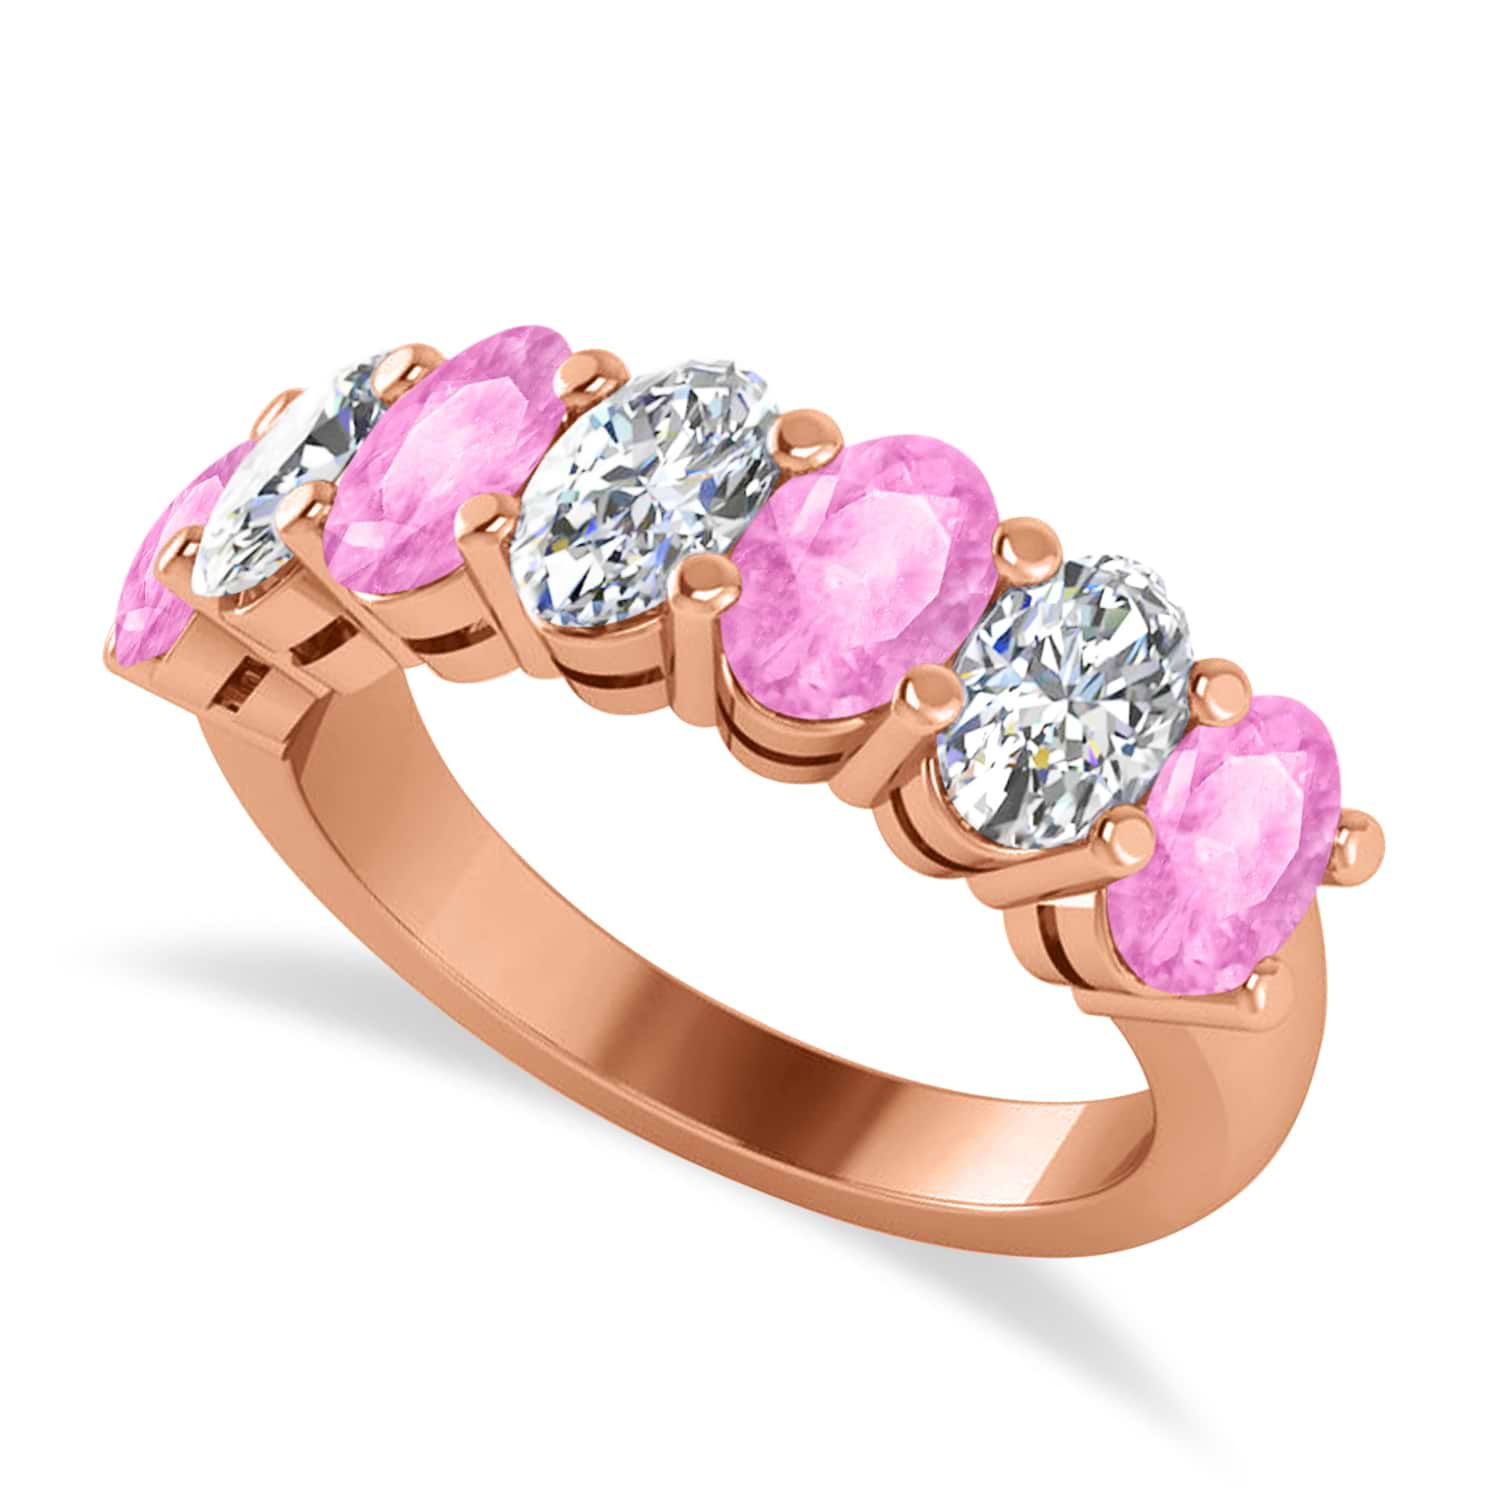 Oval Diamond & Pink Sapphire Seven Stone Ring 14k Rose Gold (3.90ct)